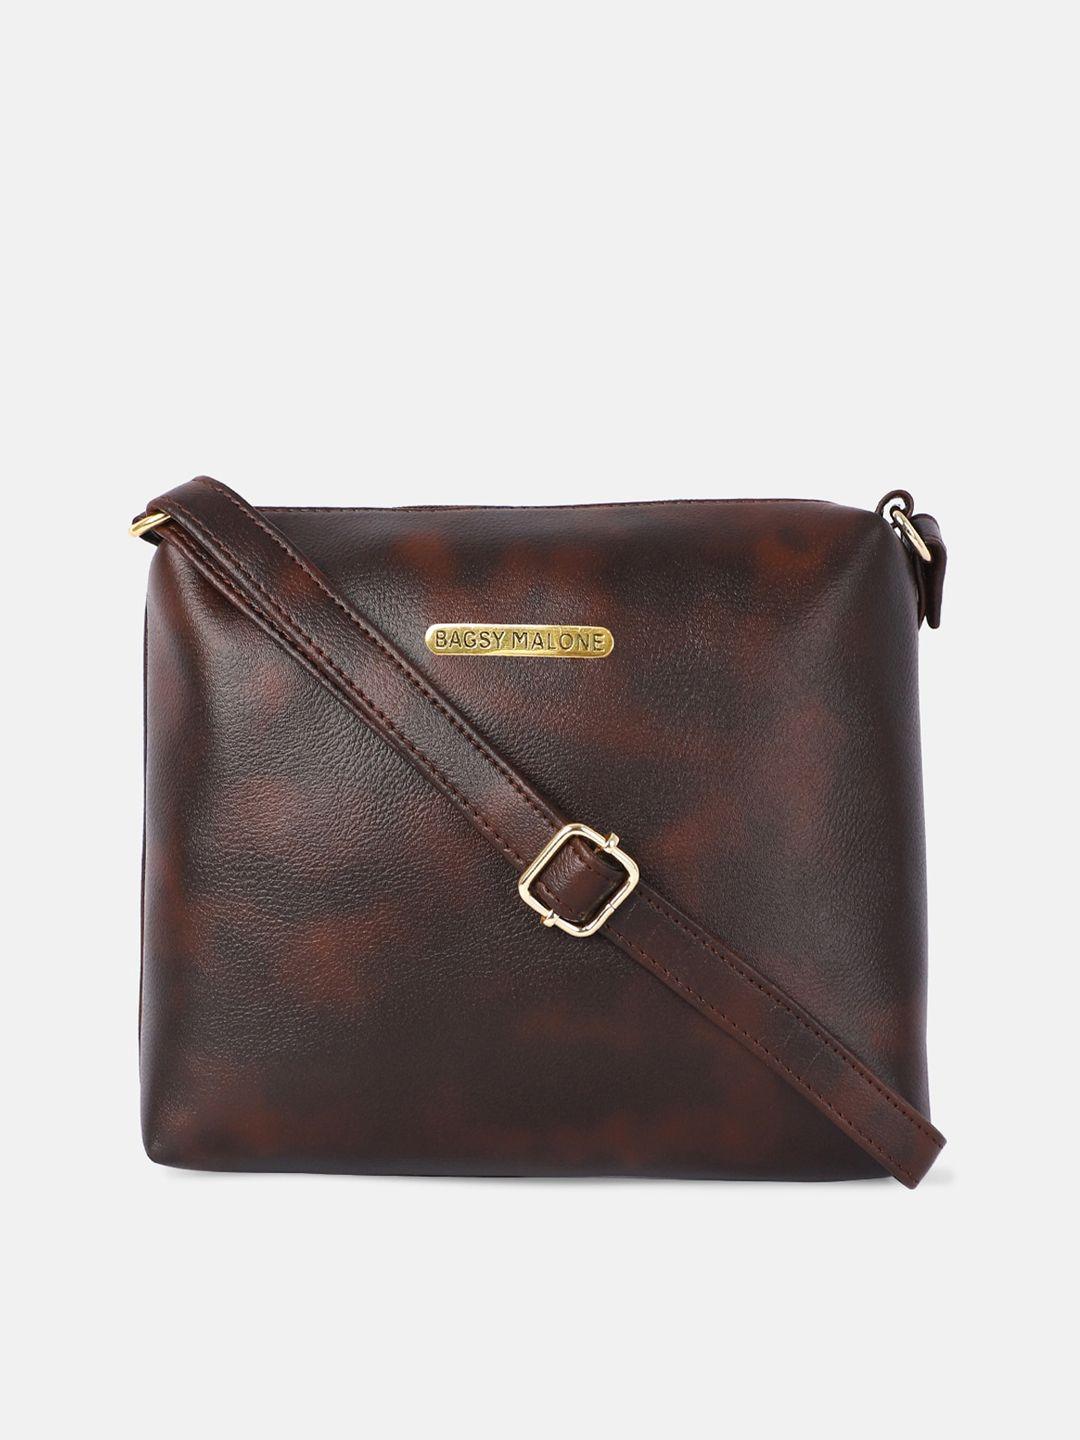 bagsy malone brown structured sling bag